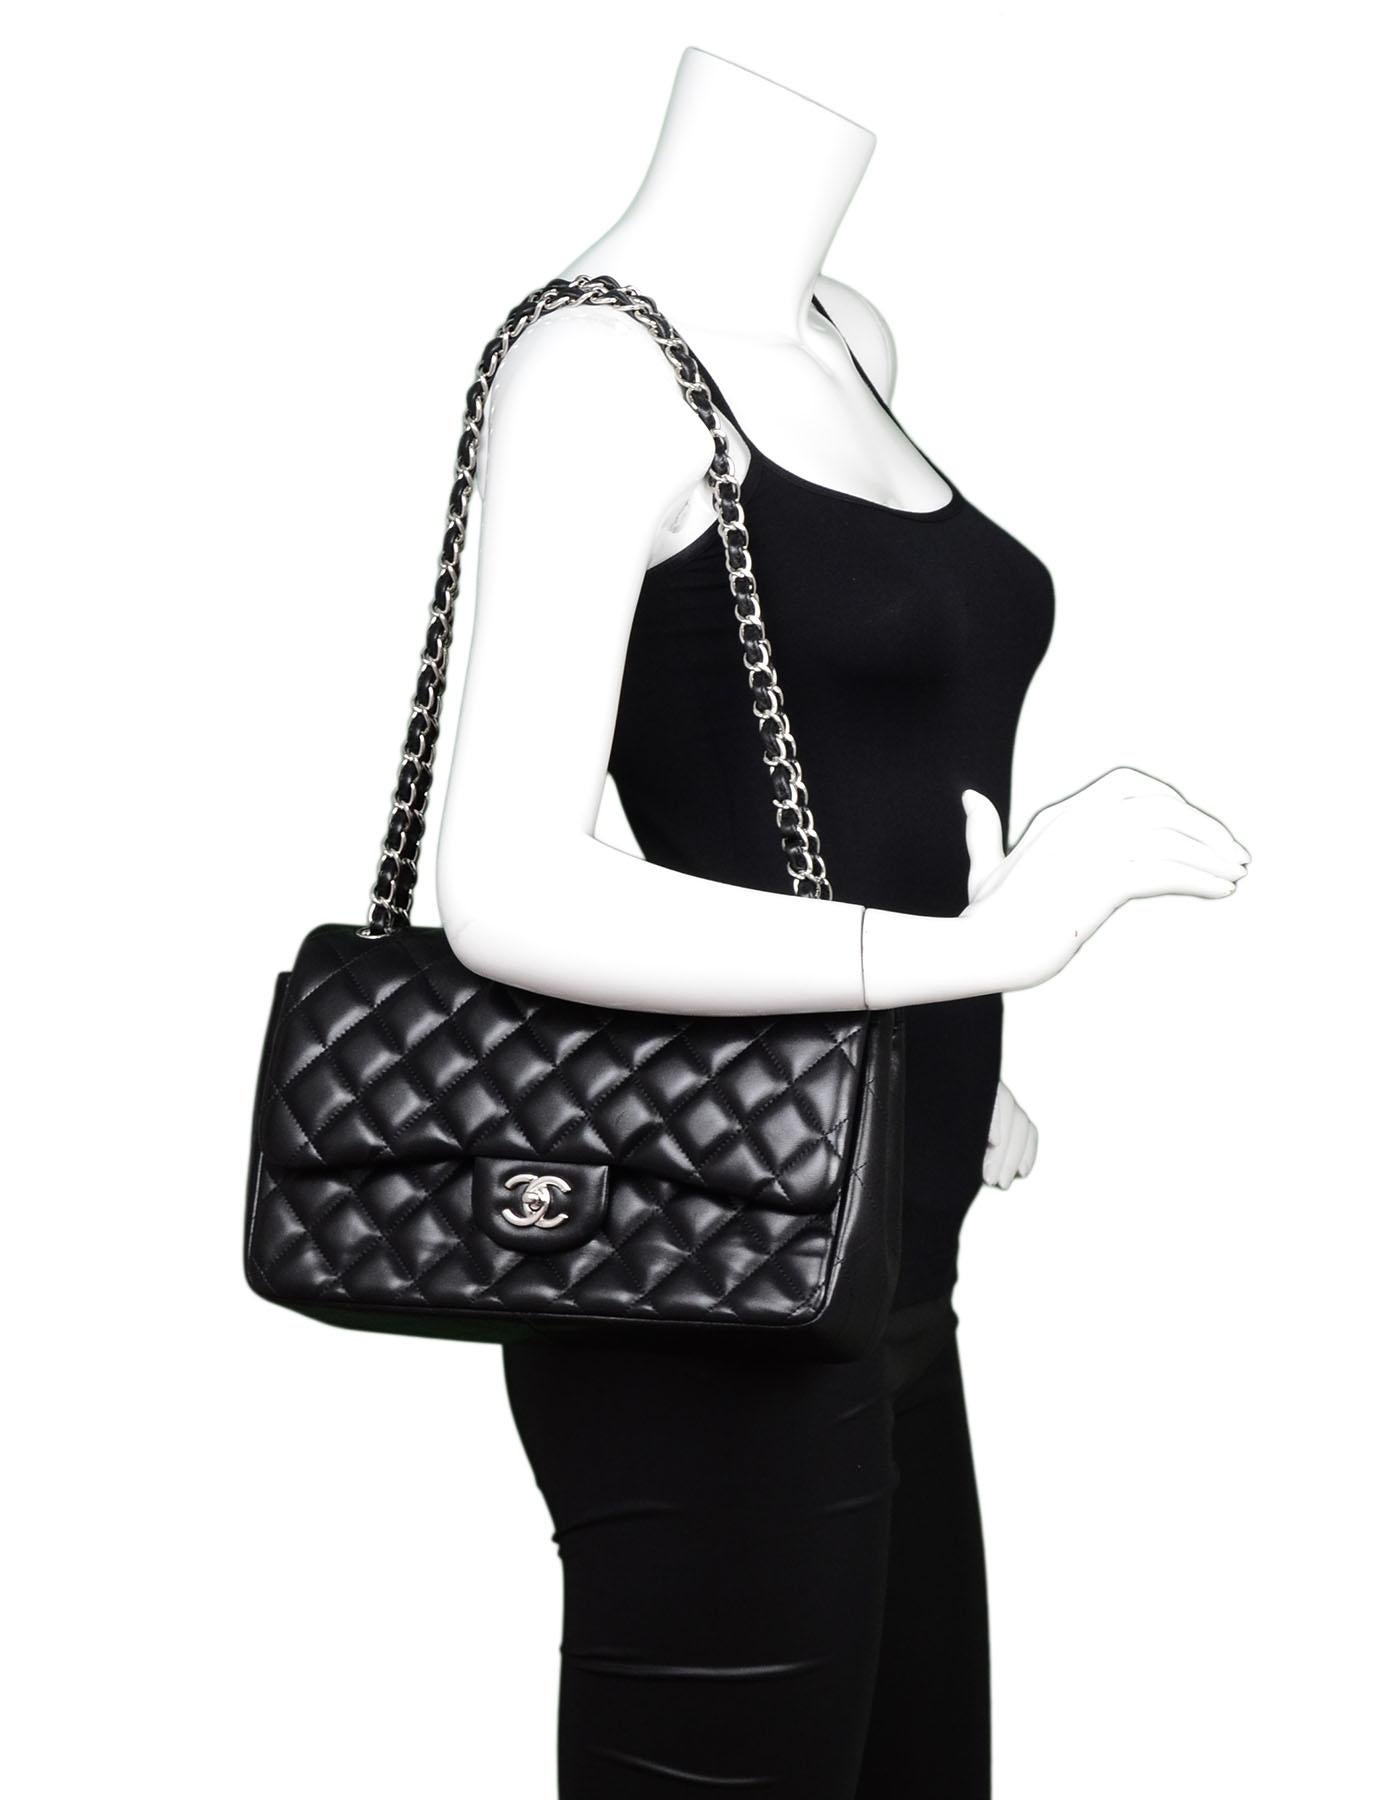 Chanel Black Quilted Lambskin Jumbo Double Flap Classic Bag

Made In: Italy
Year of Production: 2012
Color: Black
Hardware: Silverotne
Materials: Lambskin leather, metal
Lining: Burgundy leather
Closure/opening: Double flap top with snap closure and